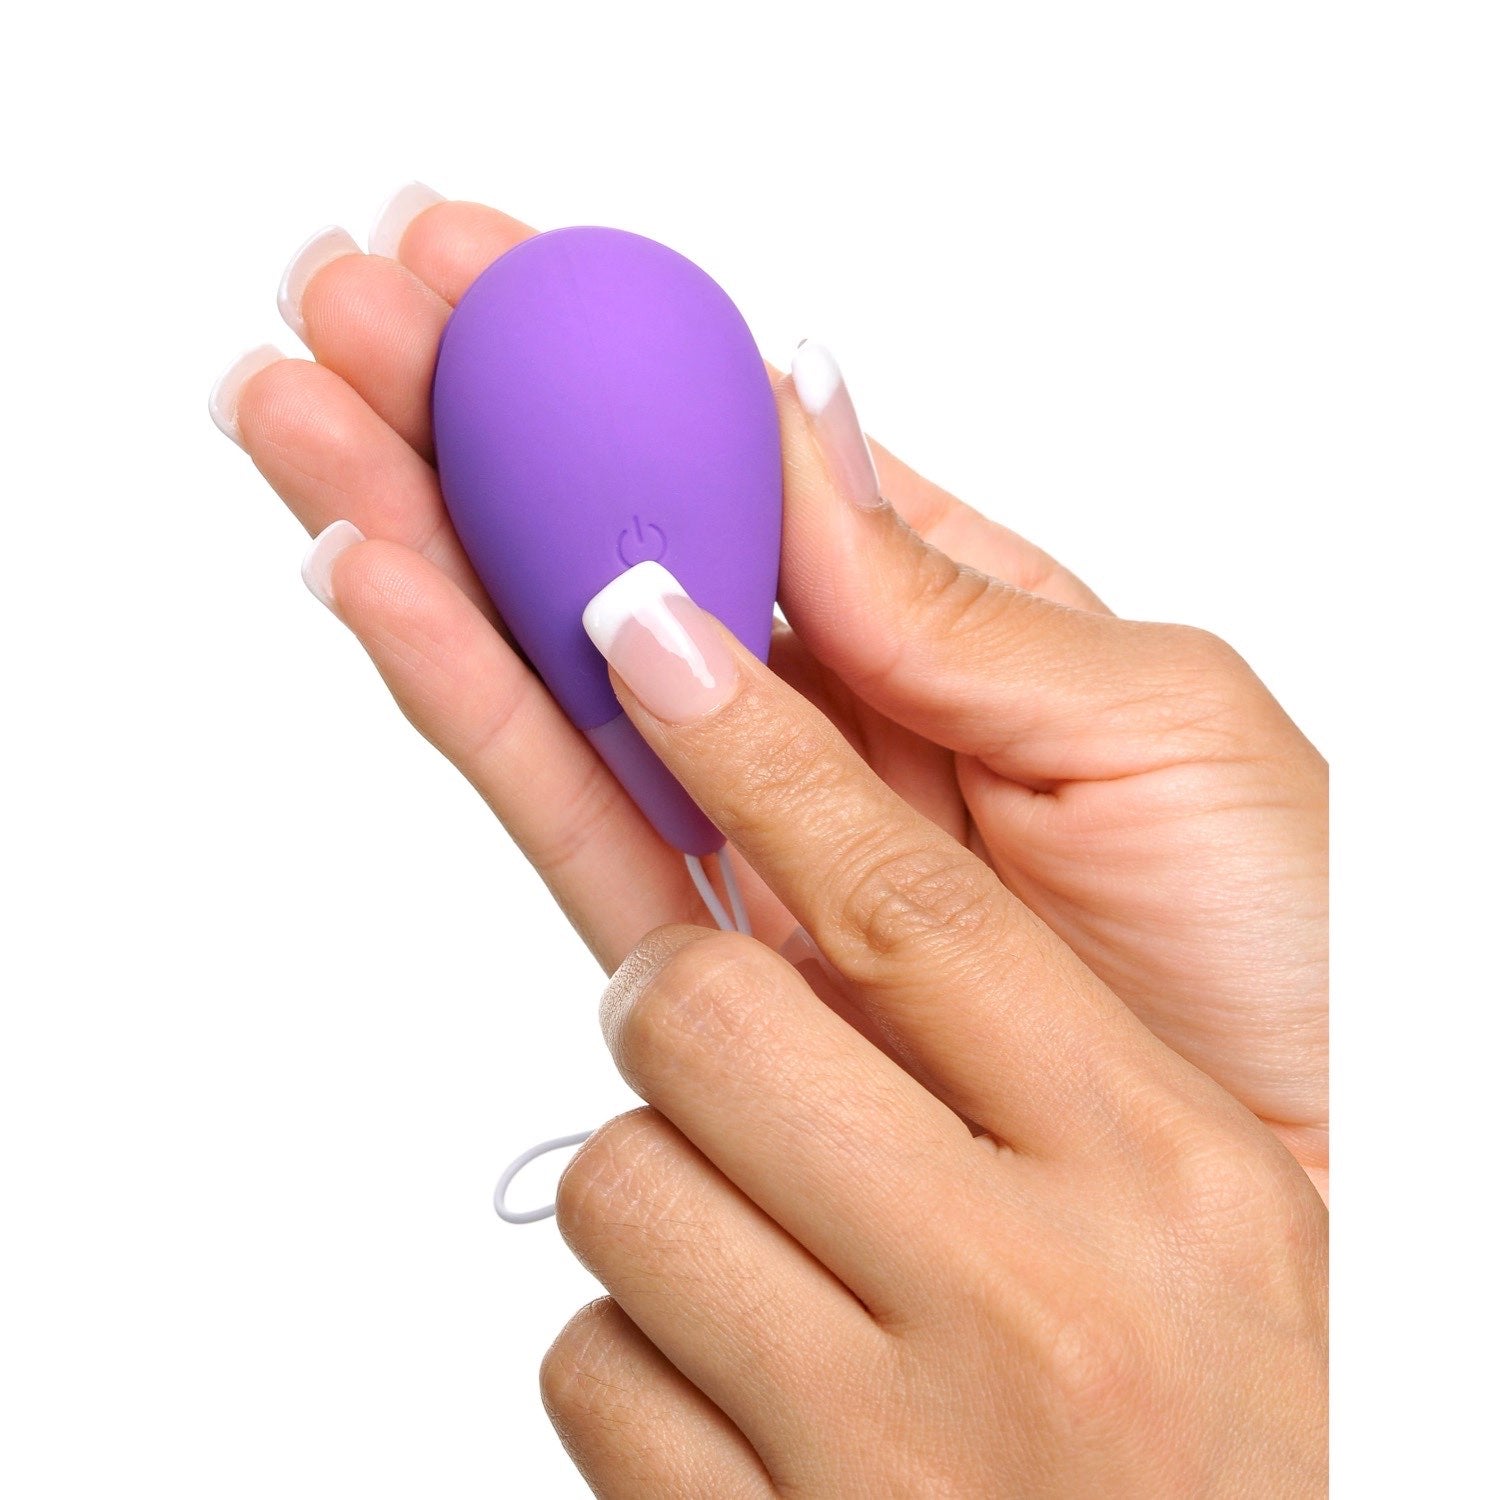 Fantasy For Her Remote Kegel Excite-Her - Purple USB Rechargeable Vibrating Kegel Trainer with Wireless Remote by Pipedream